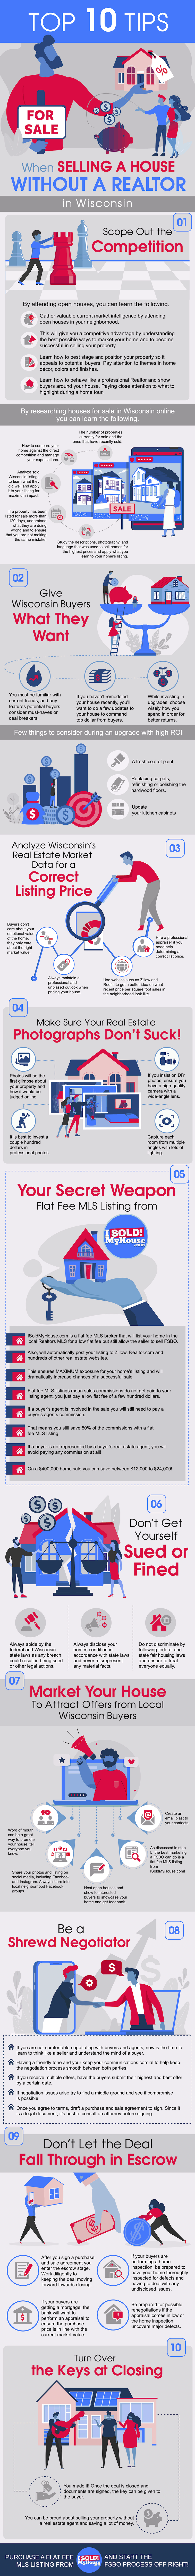 infographic of the 10 steps to sell a house in wisconsin without an agent